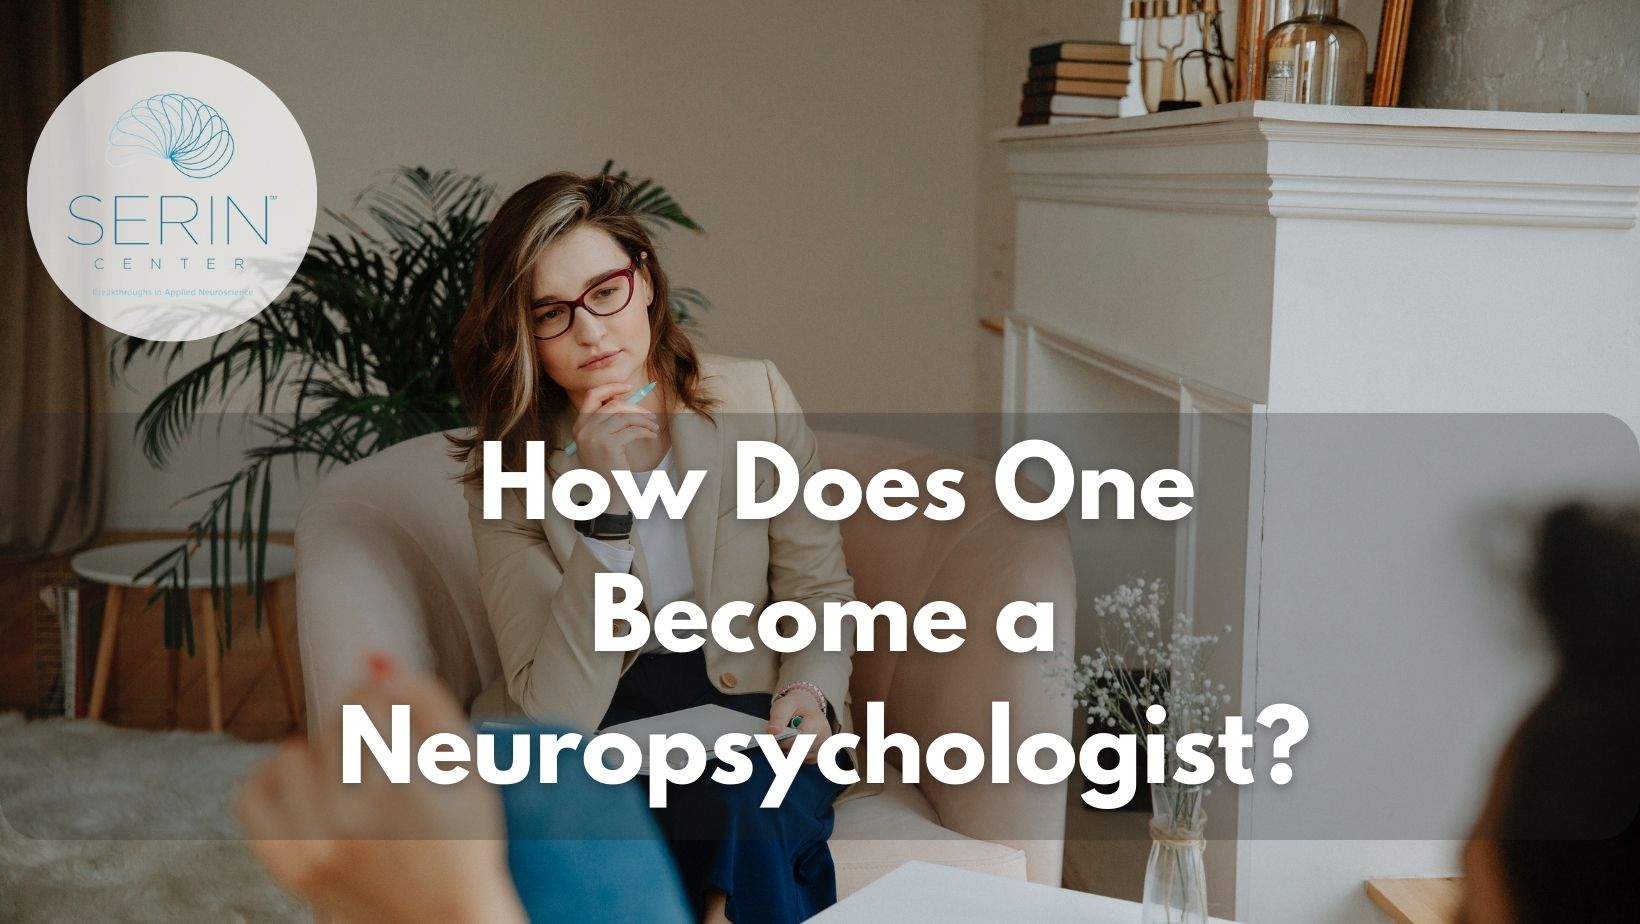 How to become neuropsychologist - Serin Center